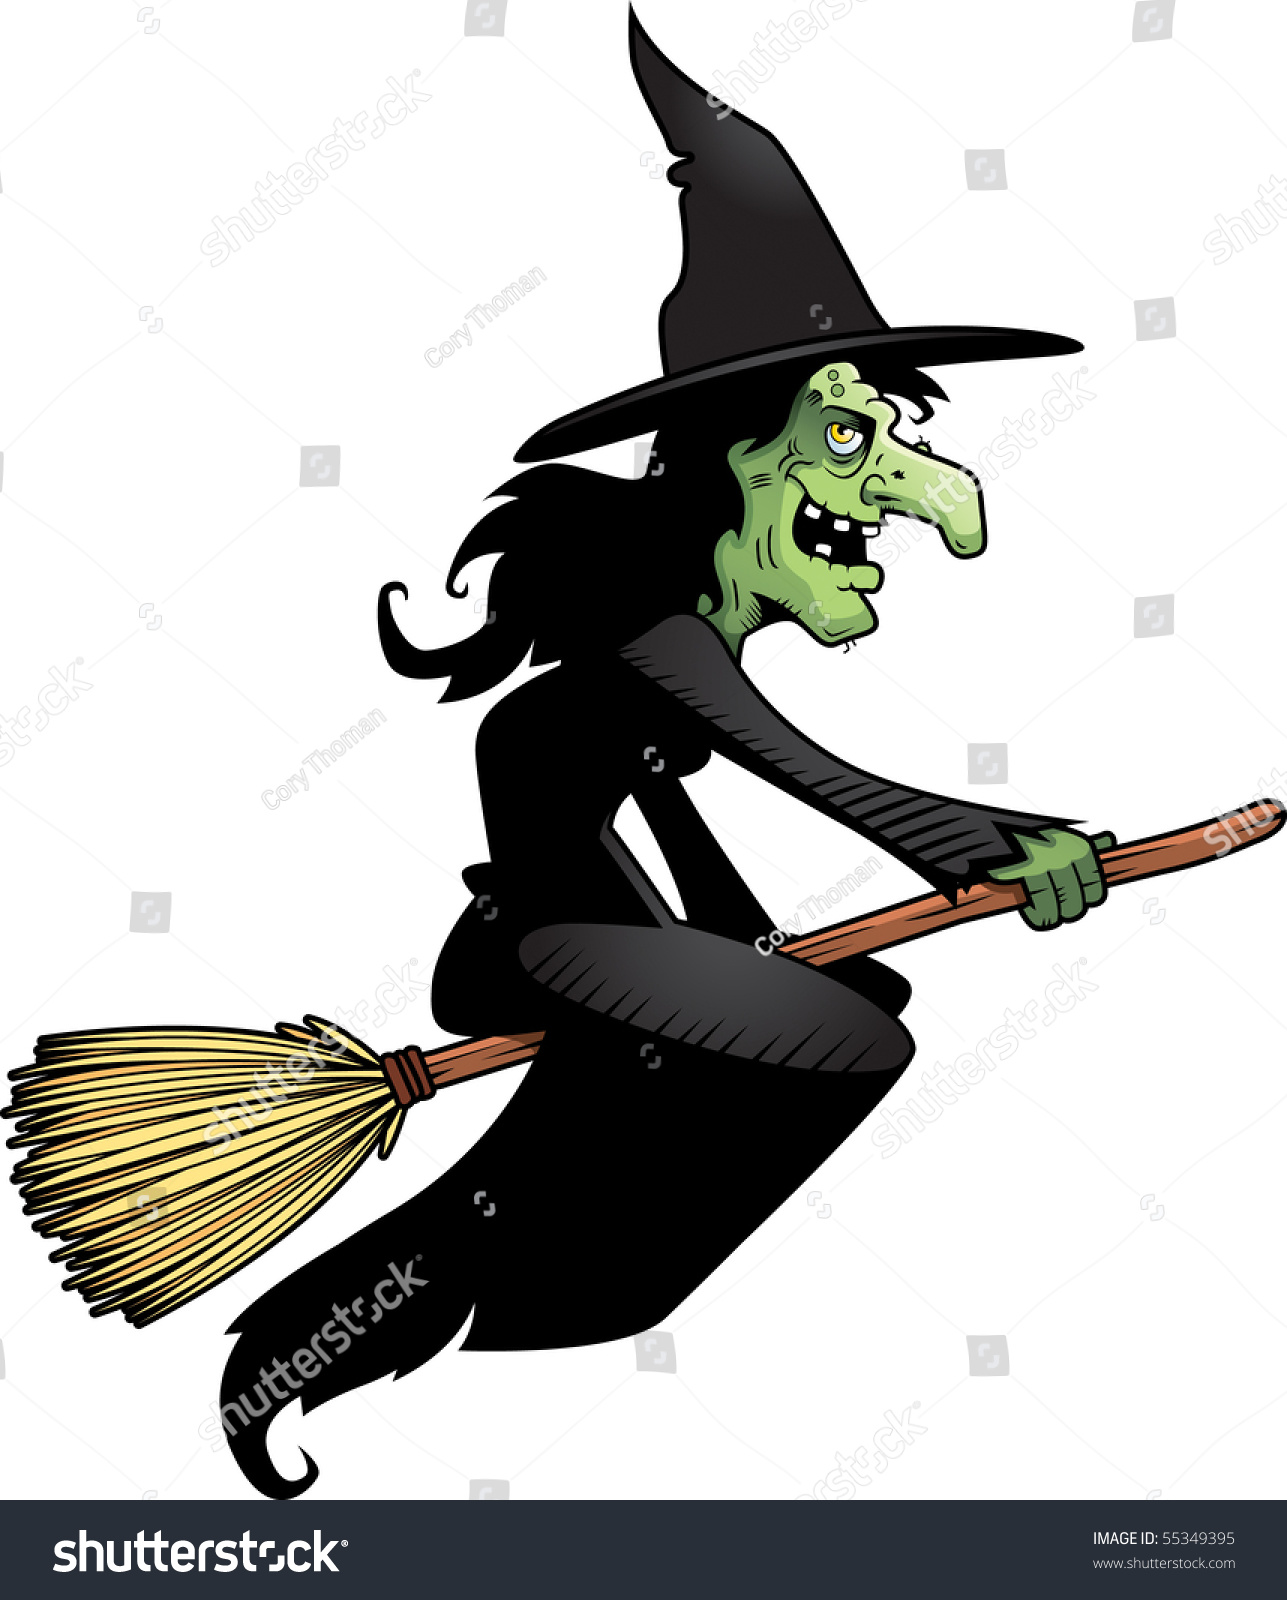 Cartoon Witch Flying On Broomstick Stock Vector 55349395 ...